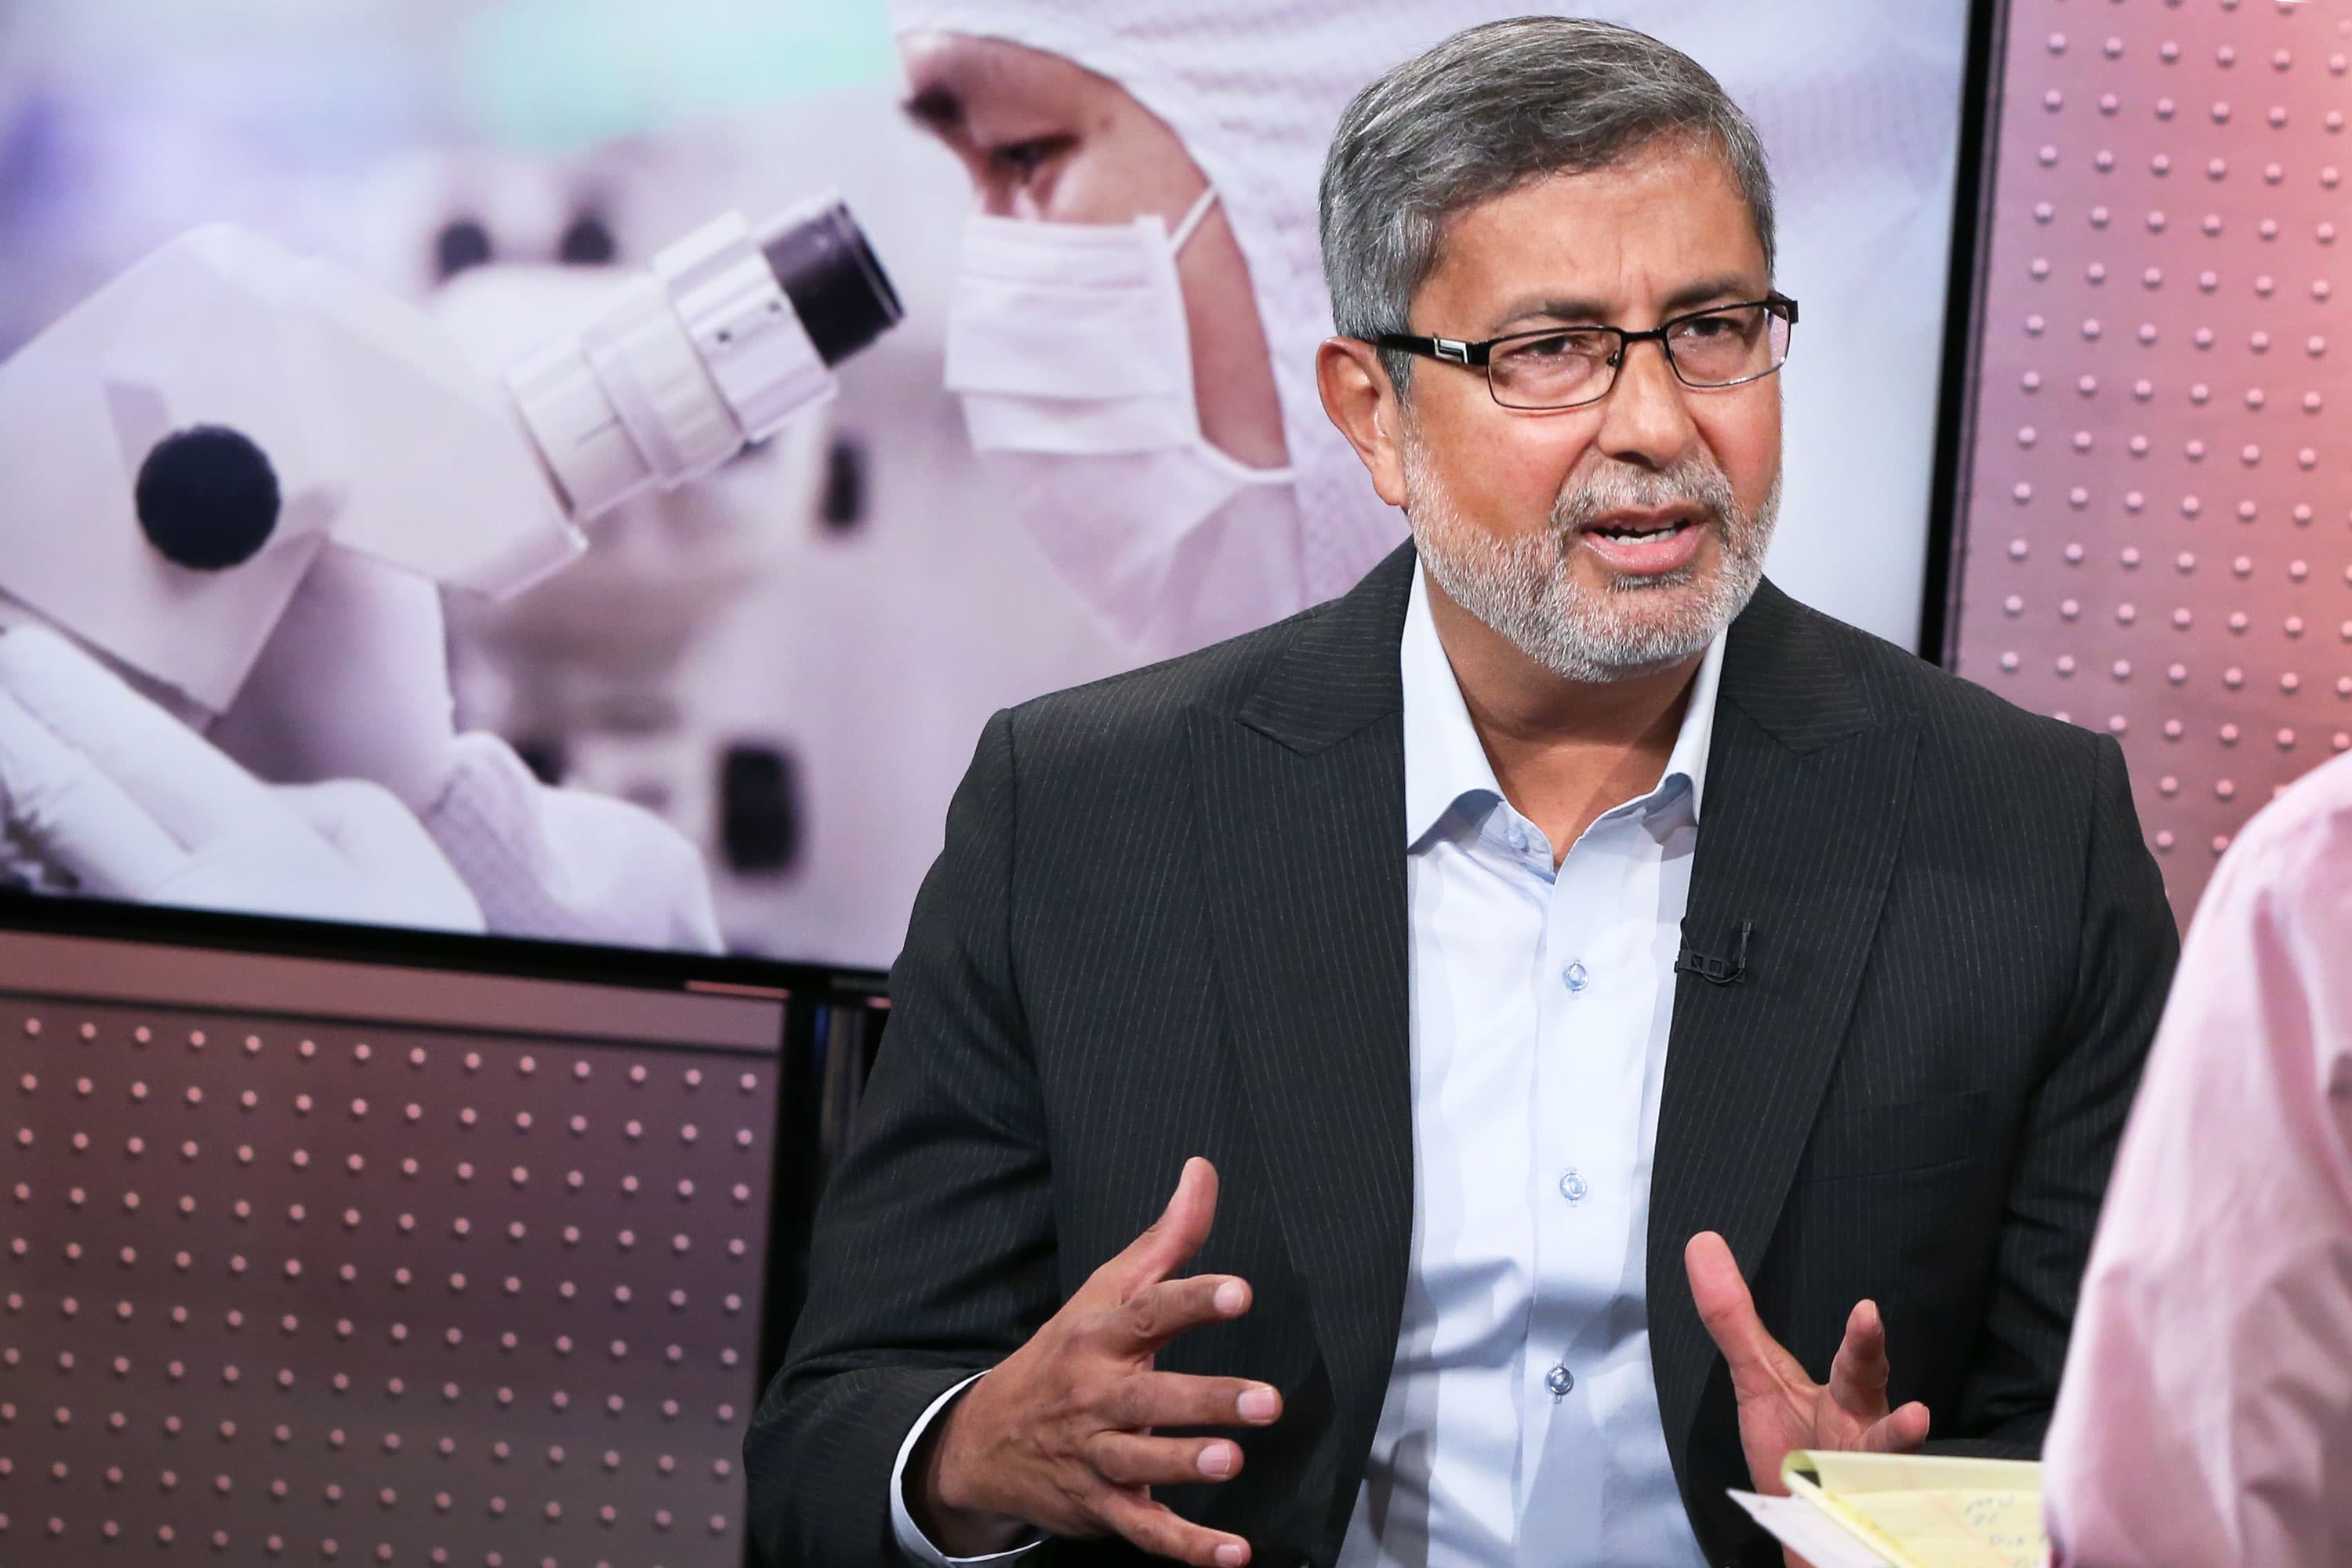 Micron CEO Sanjay Mehrotra sees semiconductor growth in autos, 5G